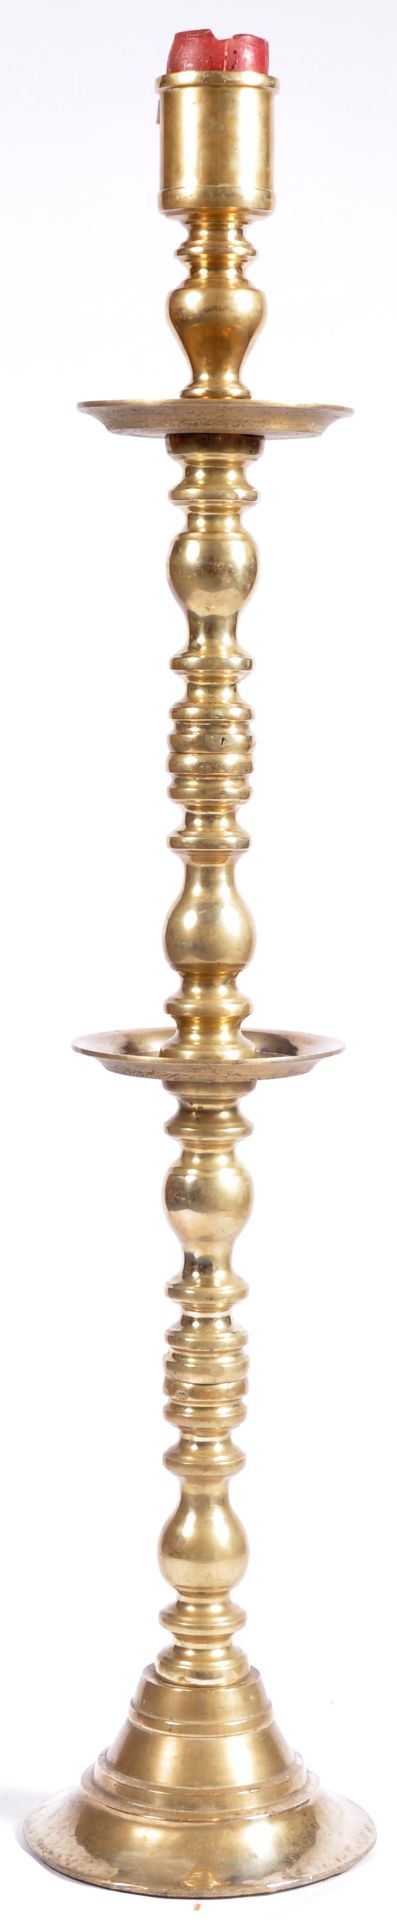 LARGE AND IMPRESSIVE HEAVY FLOOR STANDING DUTCH CANDLESTICK